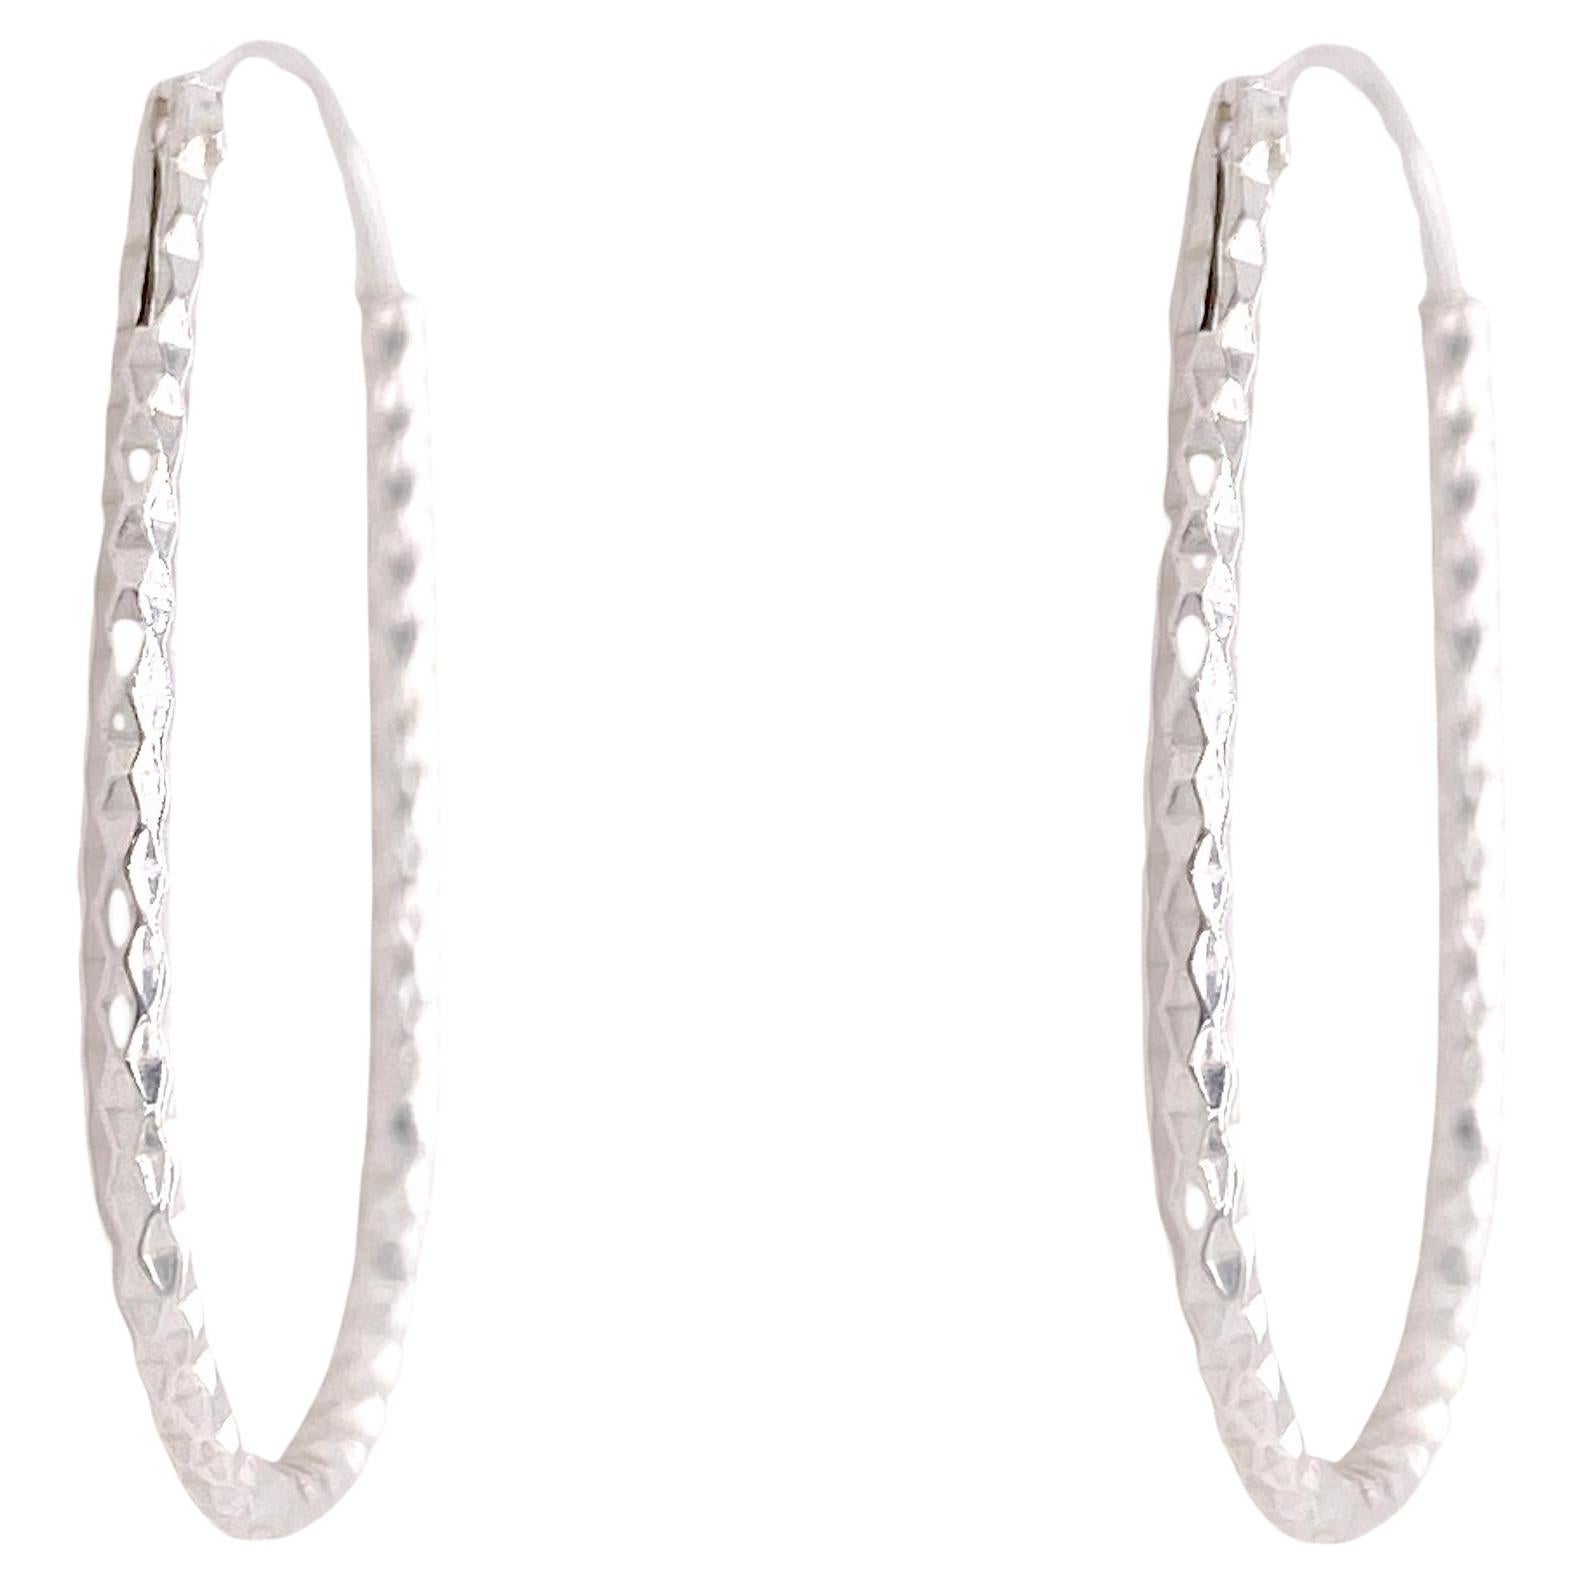 Details about   1" Twisted Textured Cut Round Hoop Earrings Real 925 Sterling Silver 